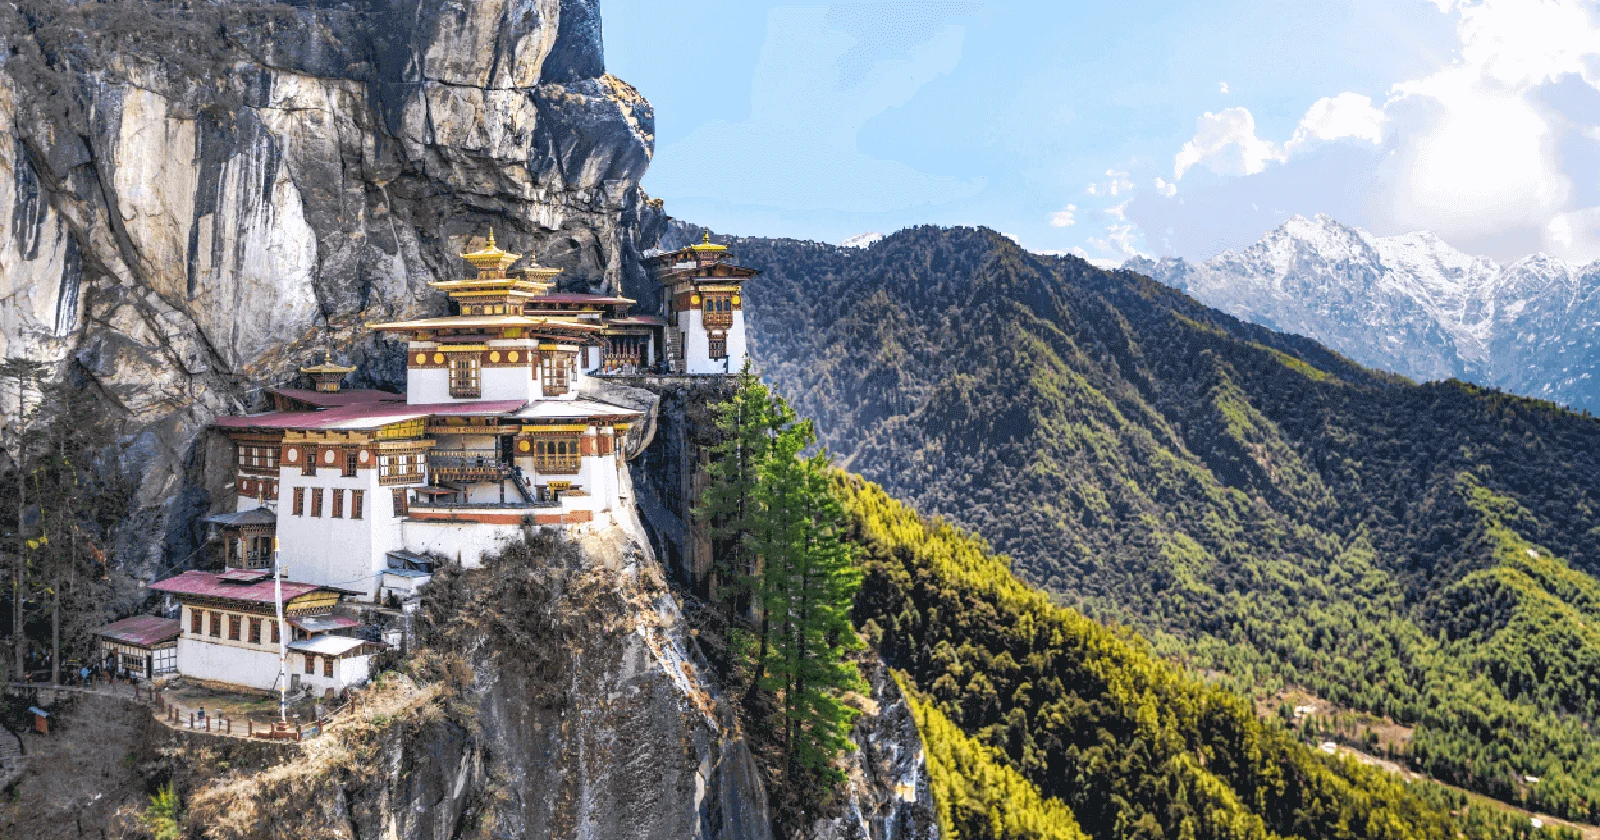 When is the best time to visit Bhutan?